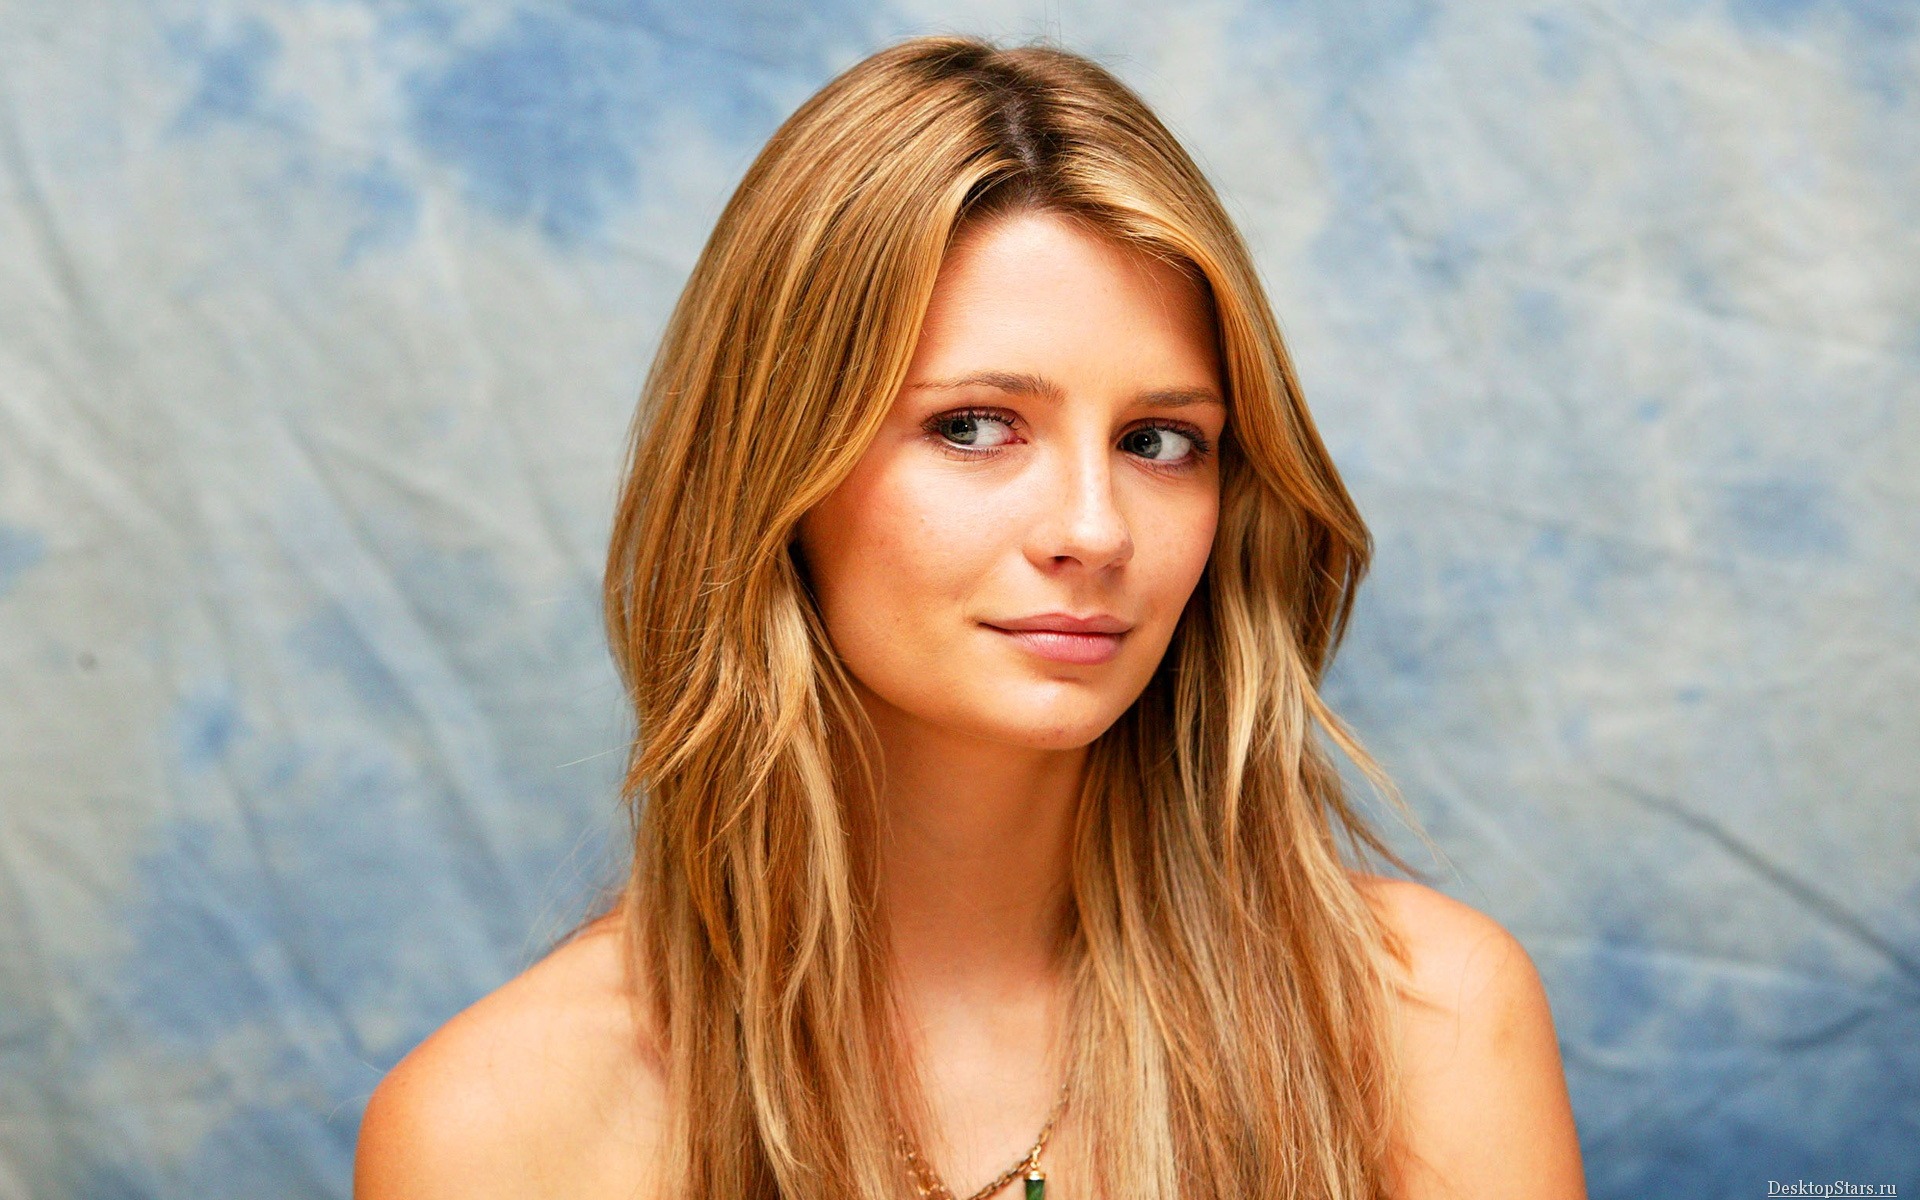 Mischa Barton #041 - 1920x1200 Wallpapers Pictures Photos Images